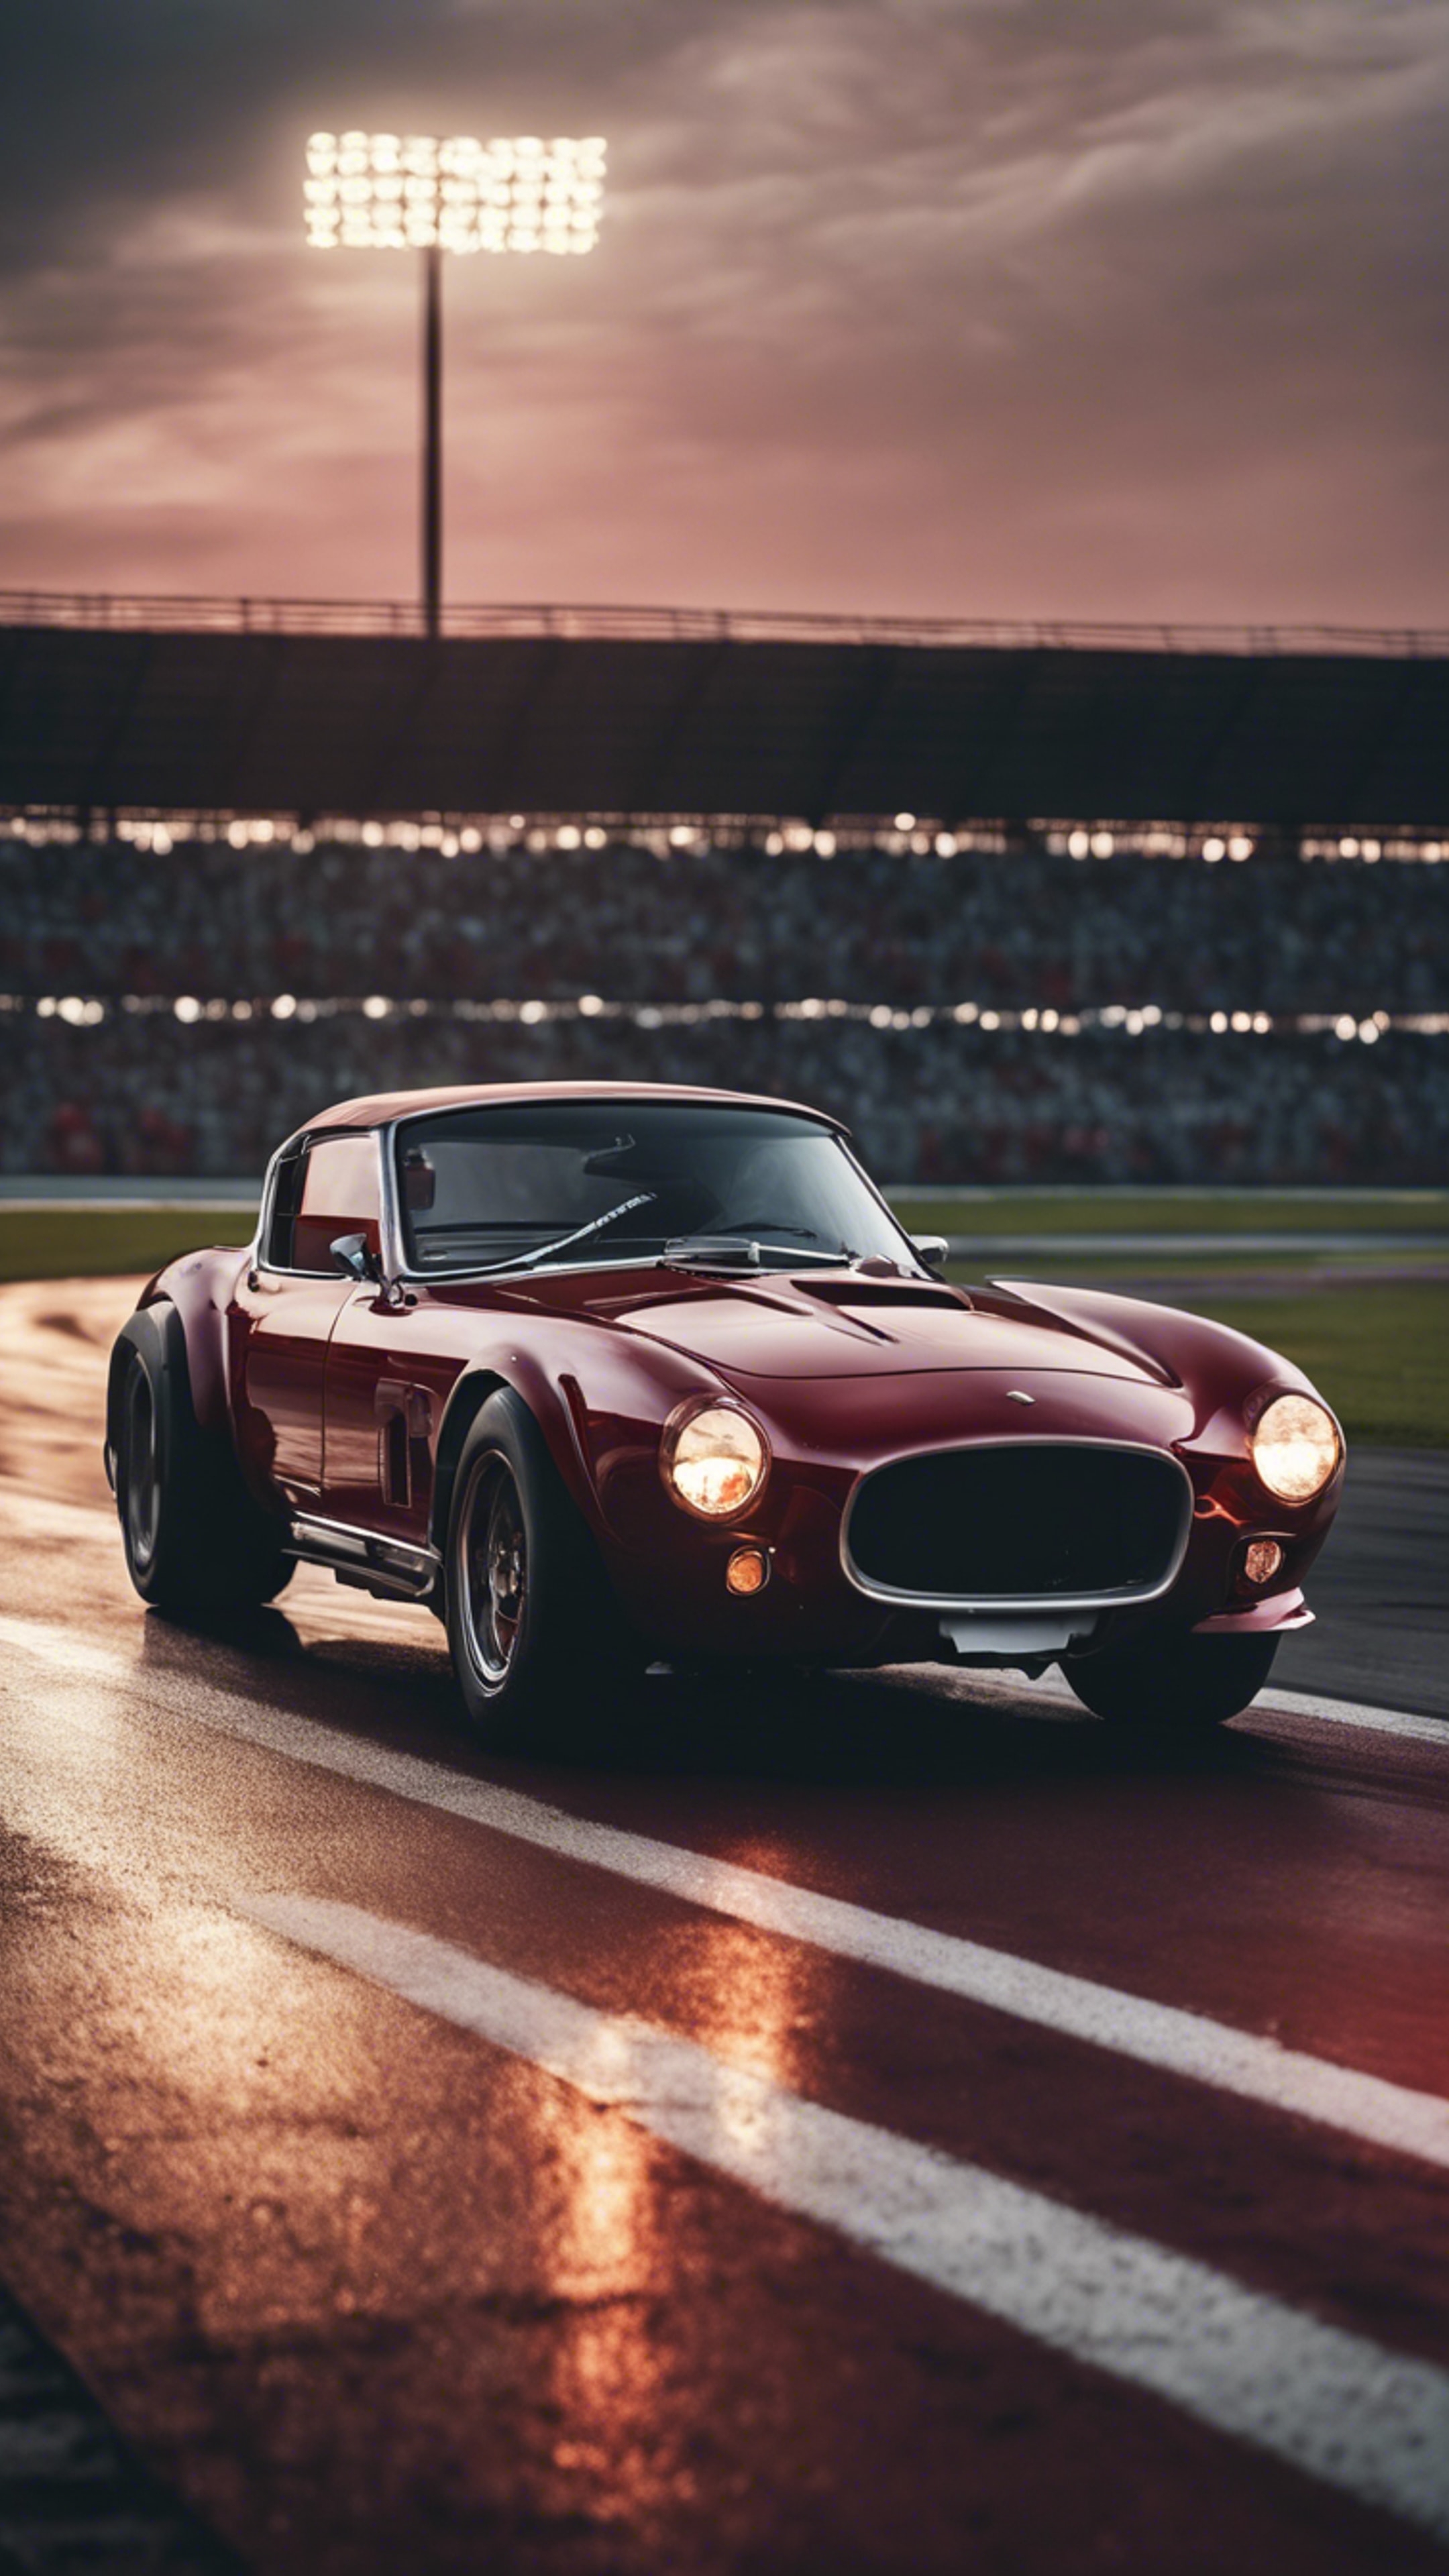 A richly toned dark red sports car racing on a track under the evening sky. Tapeta na zeď[f7c86e5103c94fca80ae]